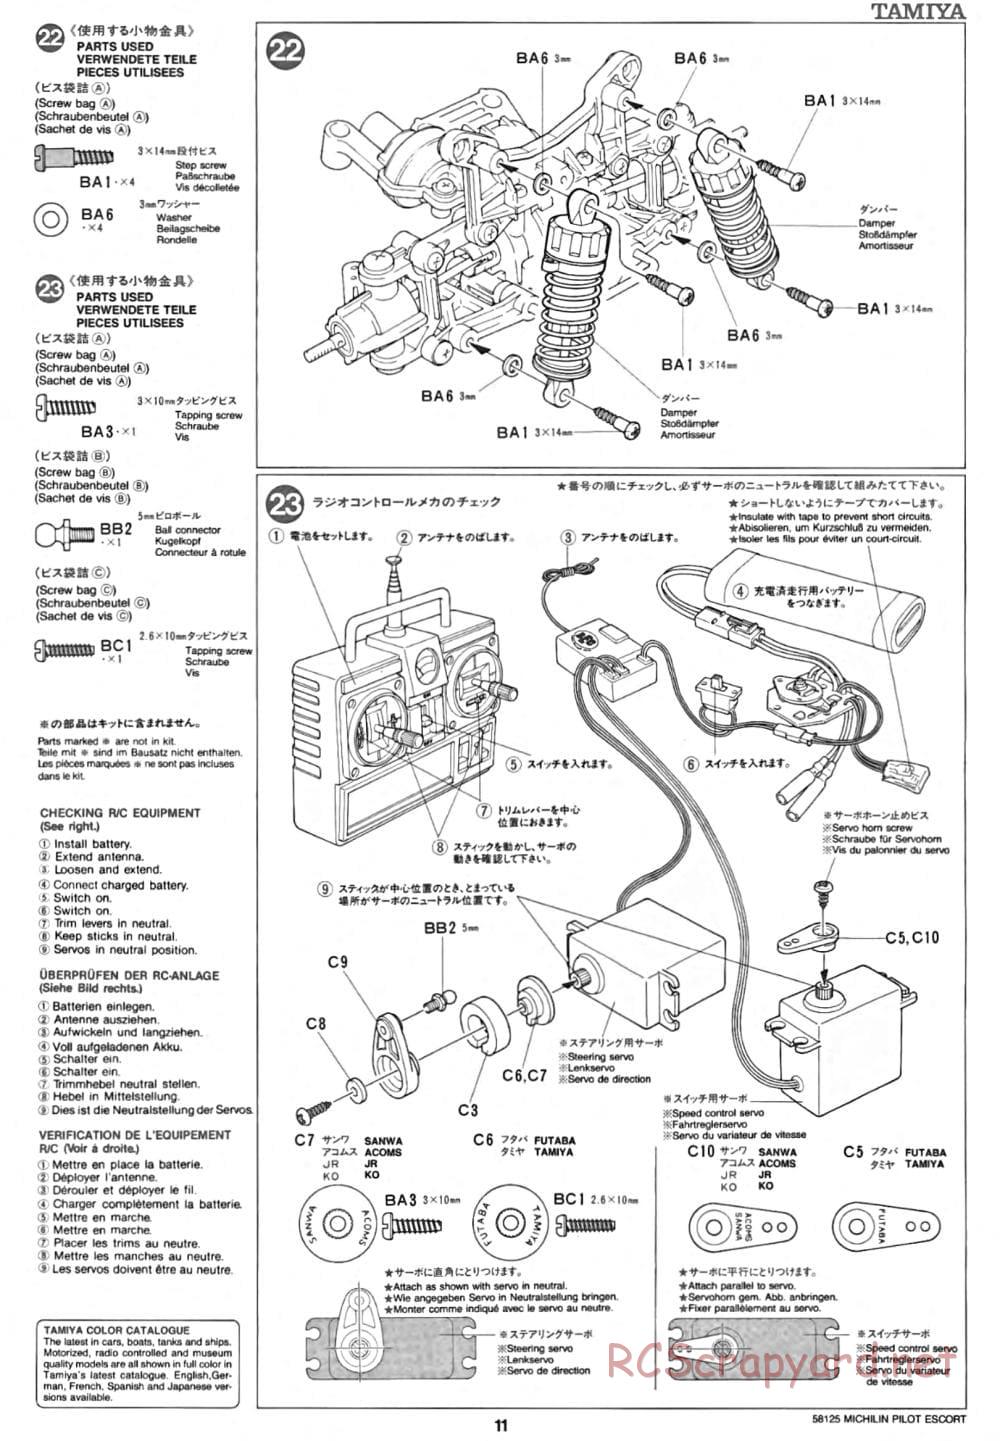 Tamiya - Michelin Pilot Ford Escort RS Cosworth - TA-01 Chassis - Manual - Page 11